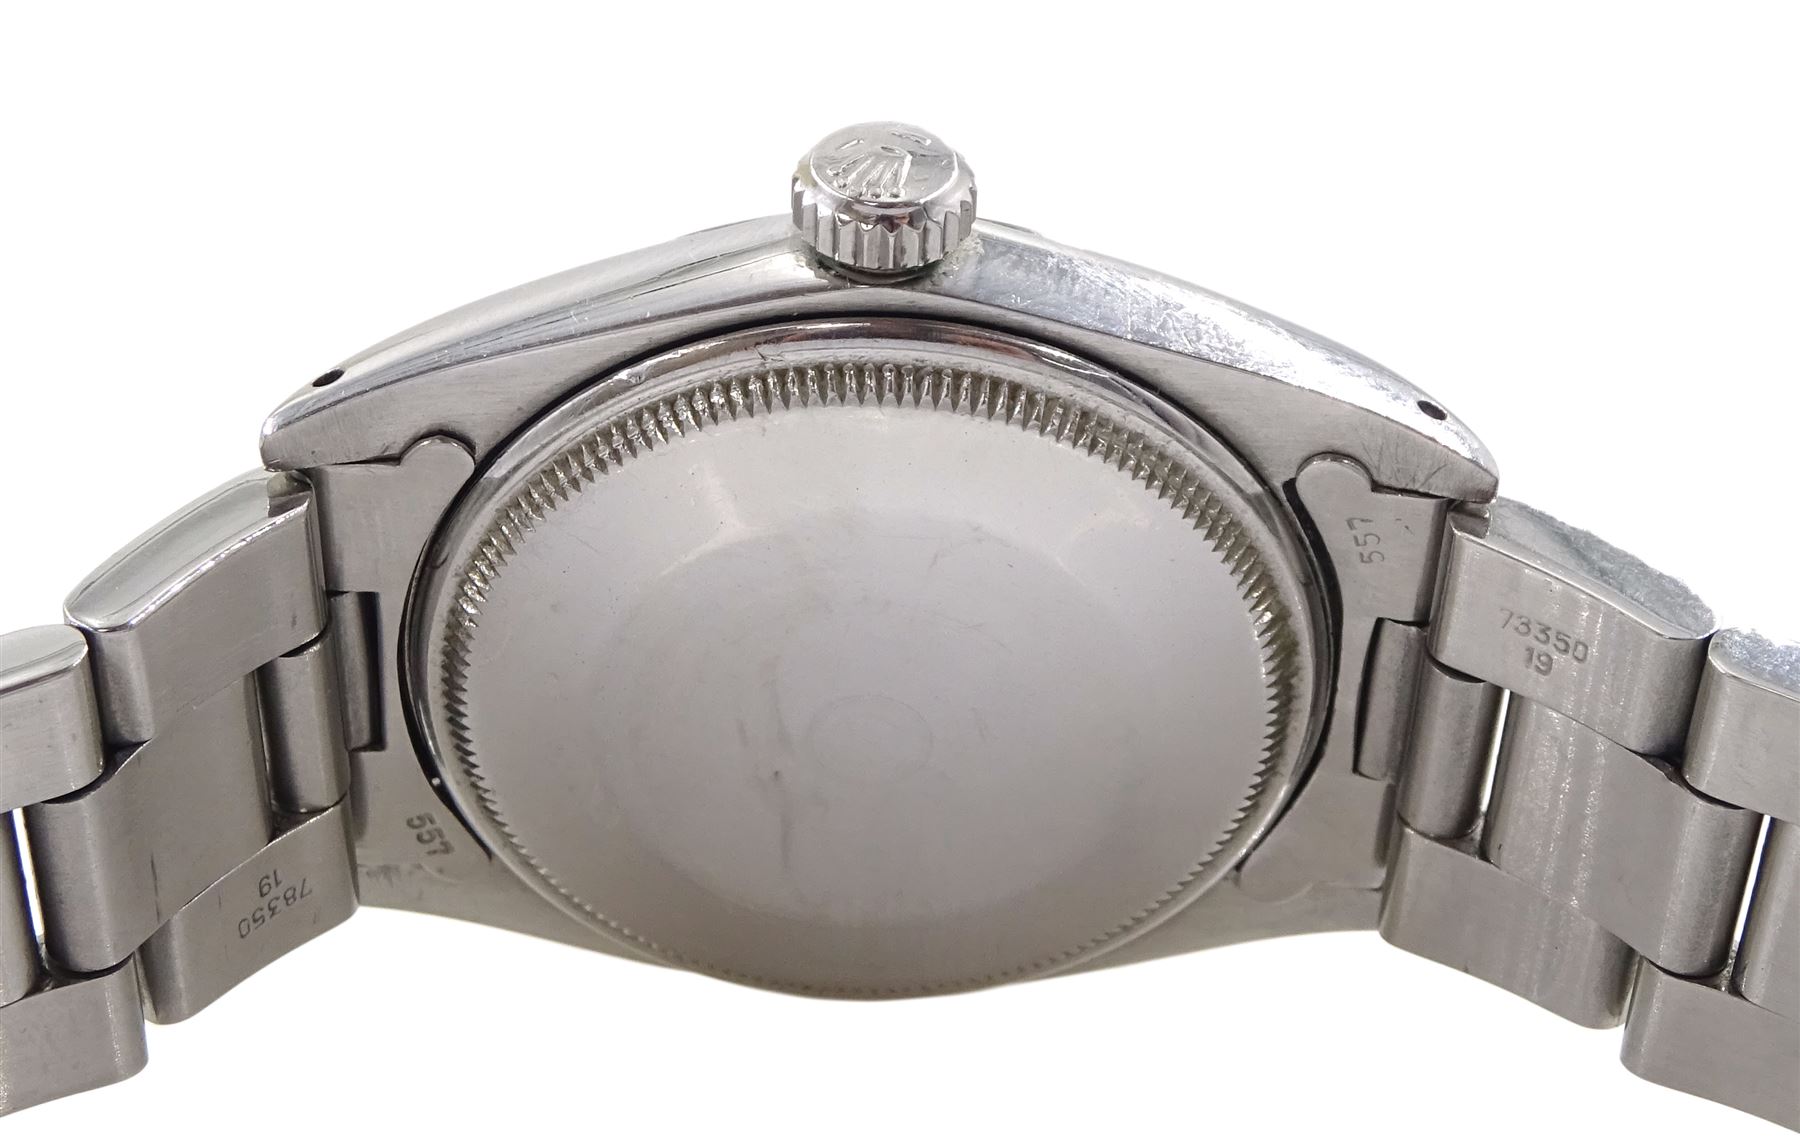 Rolex Oyster Perpetual gentleman's stainless steel automatic wristwatch - Image 5 of 6